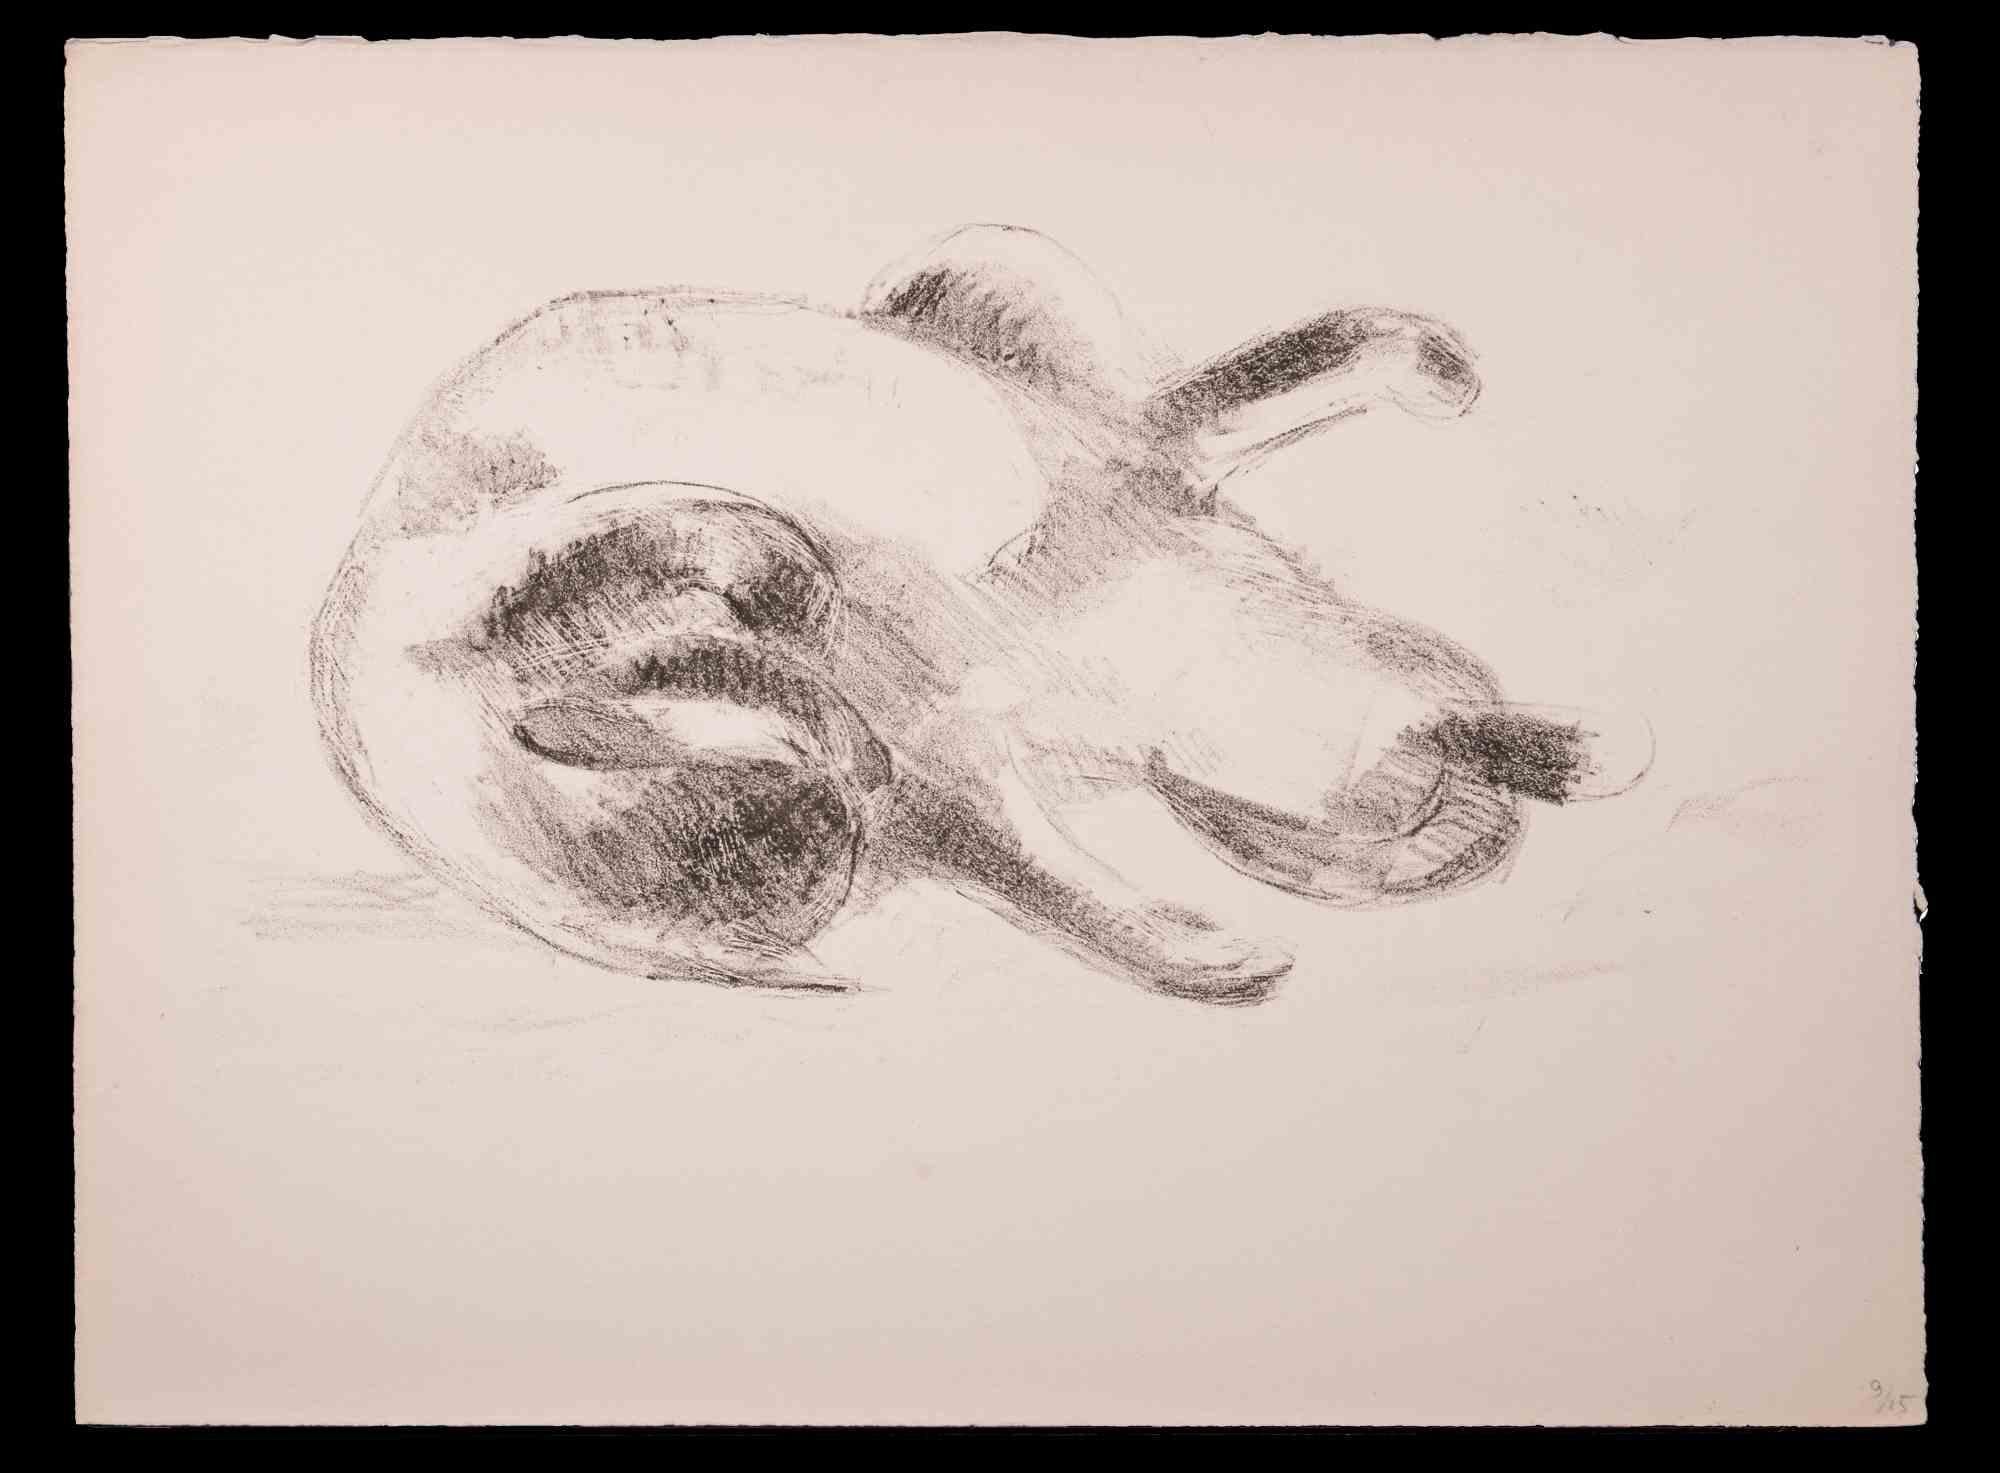 Cat -  Original Drawing by Giselle Halff - Mid 20th Century